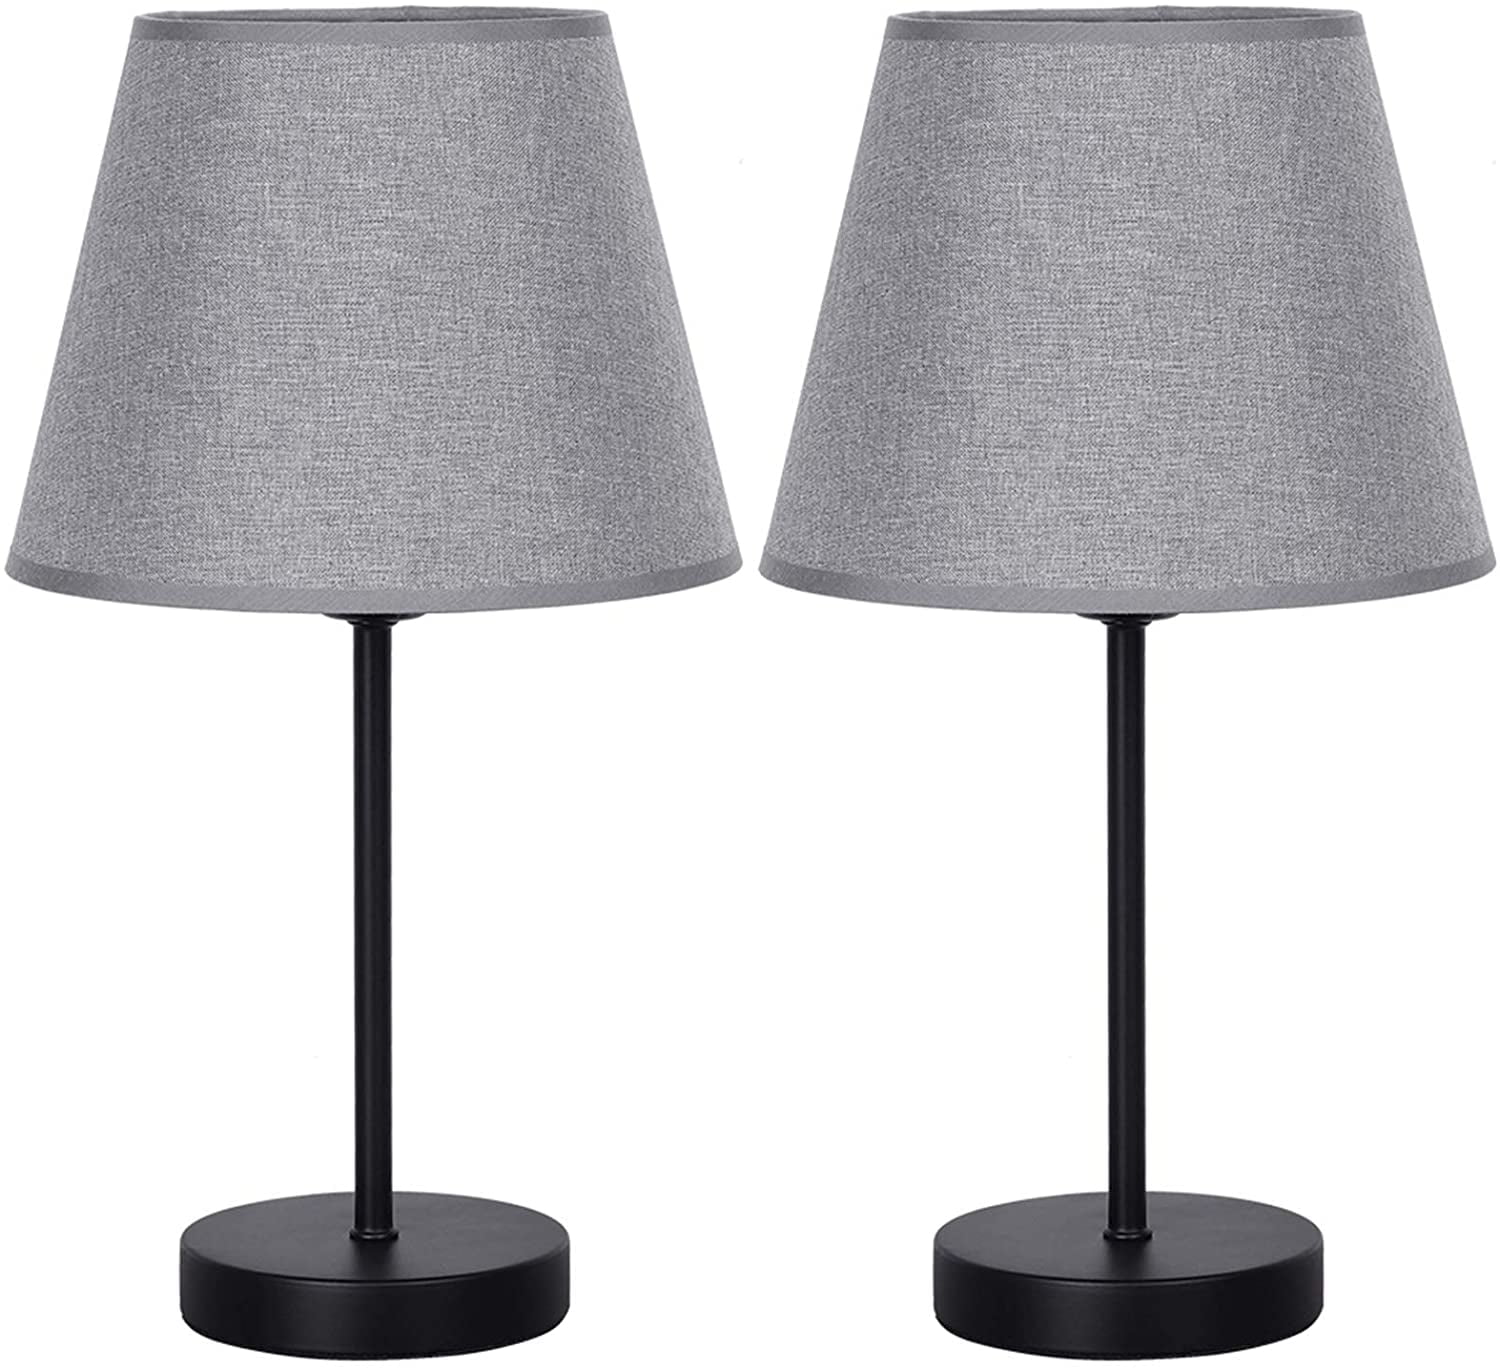 Black Small Table Lamps Vintage, Vintage Side Table Lamp